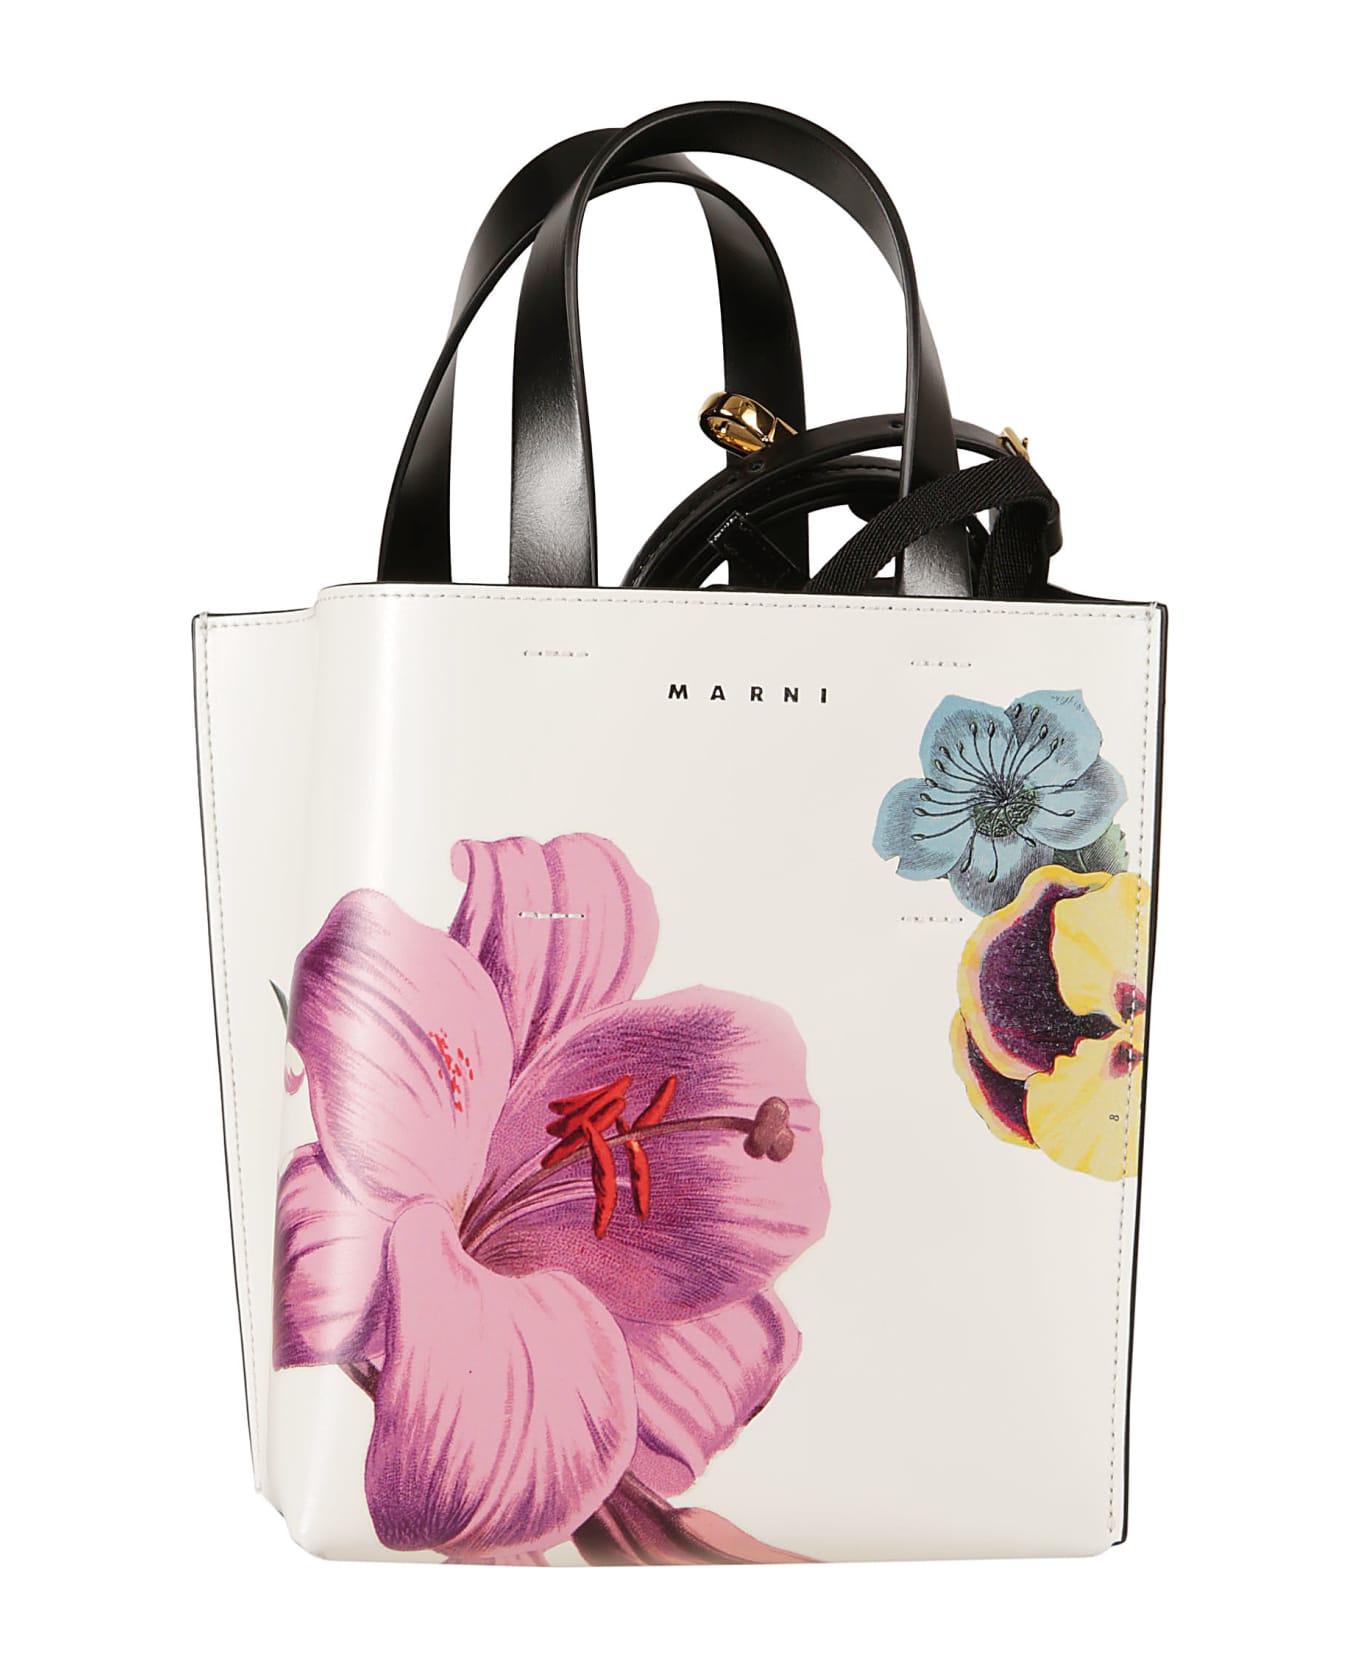 Marni Flower Print Tote - Lily White/Pink トートバッグ